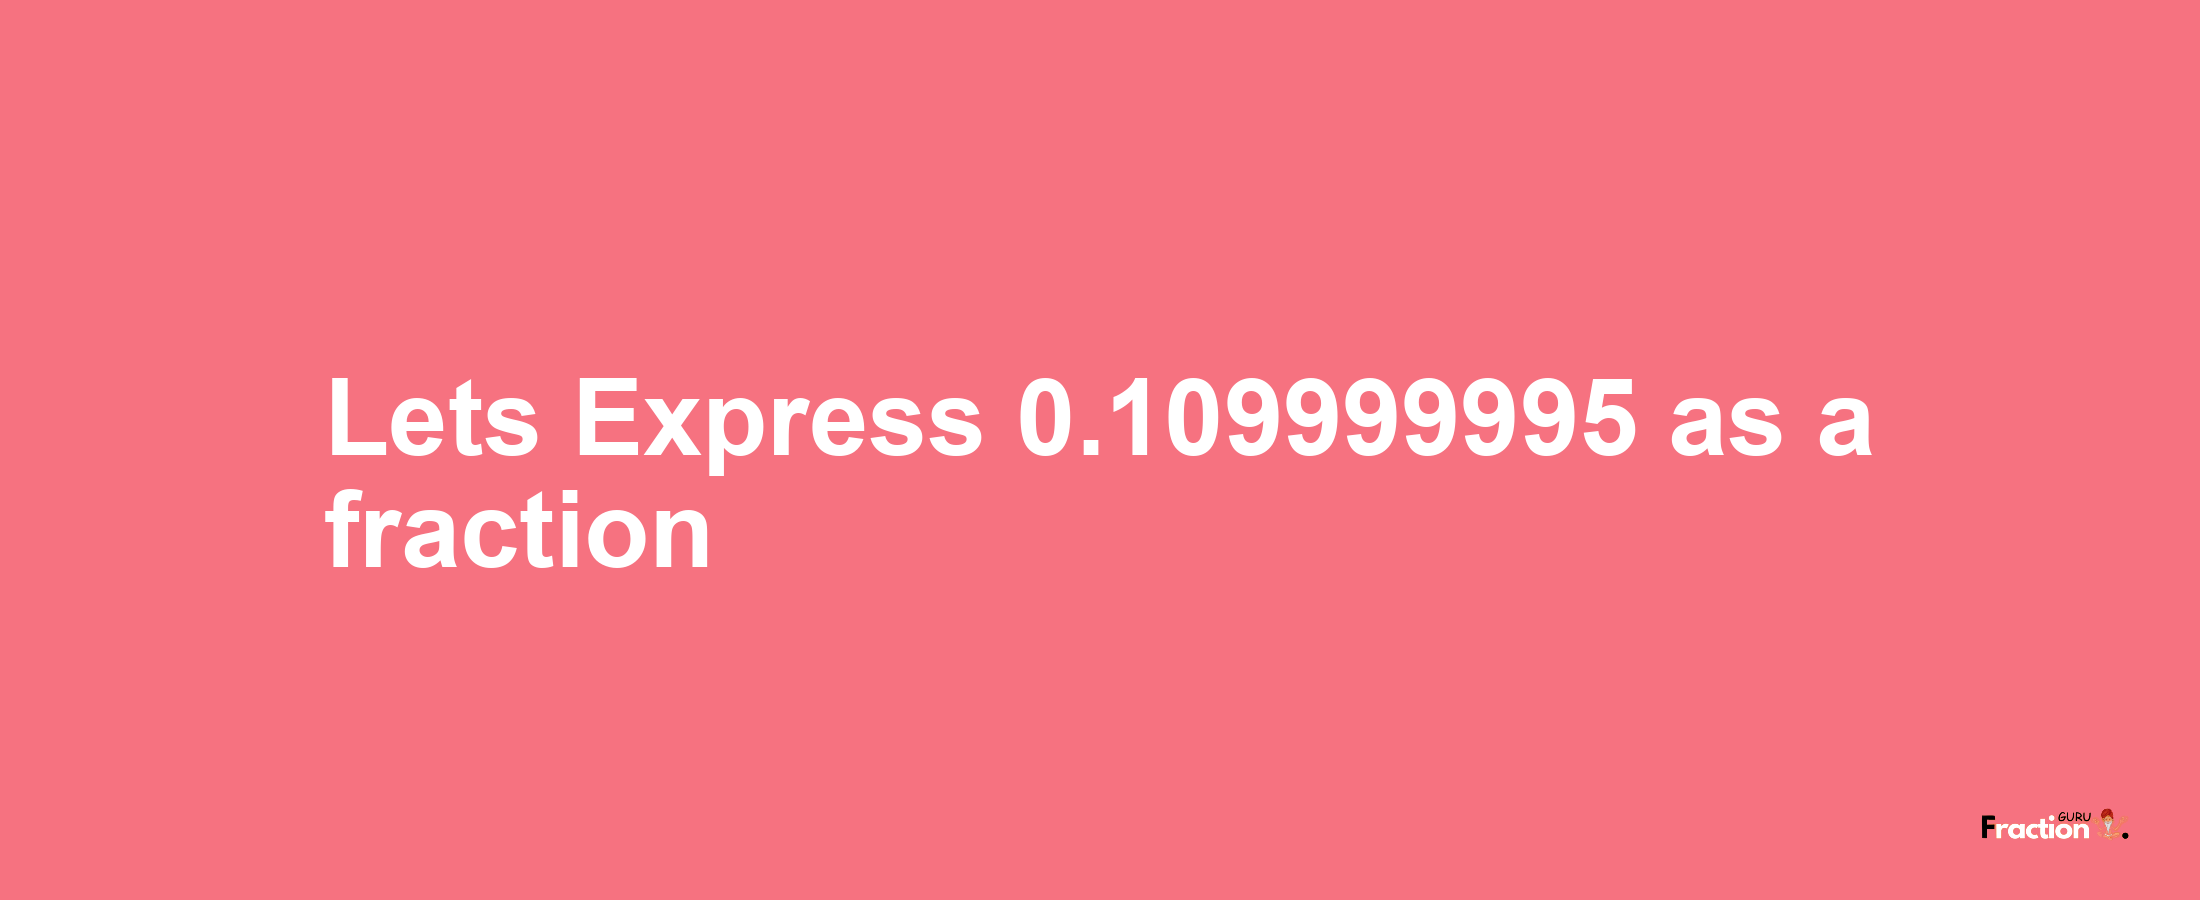 Lets Express 0.109999995 as afraction